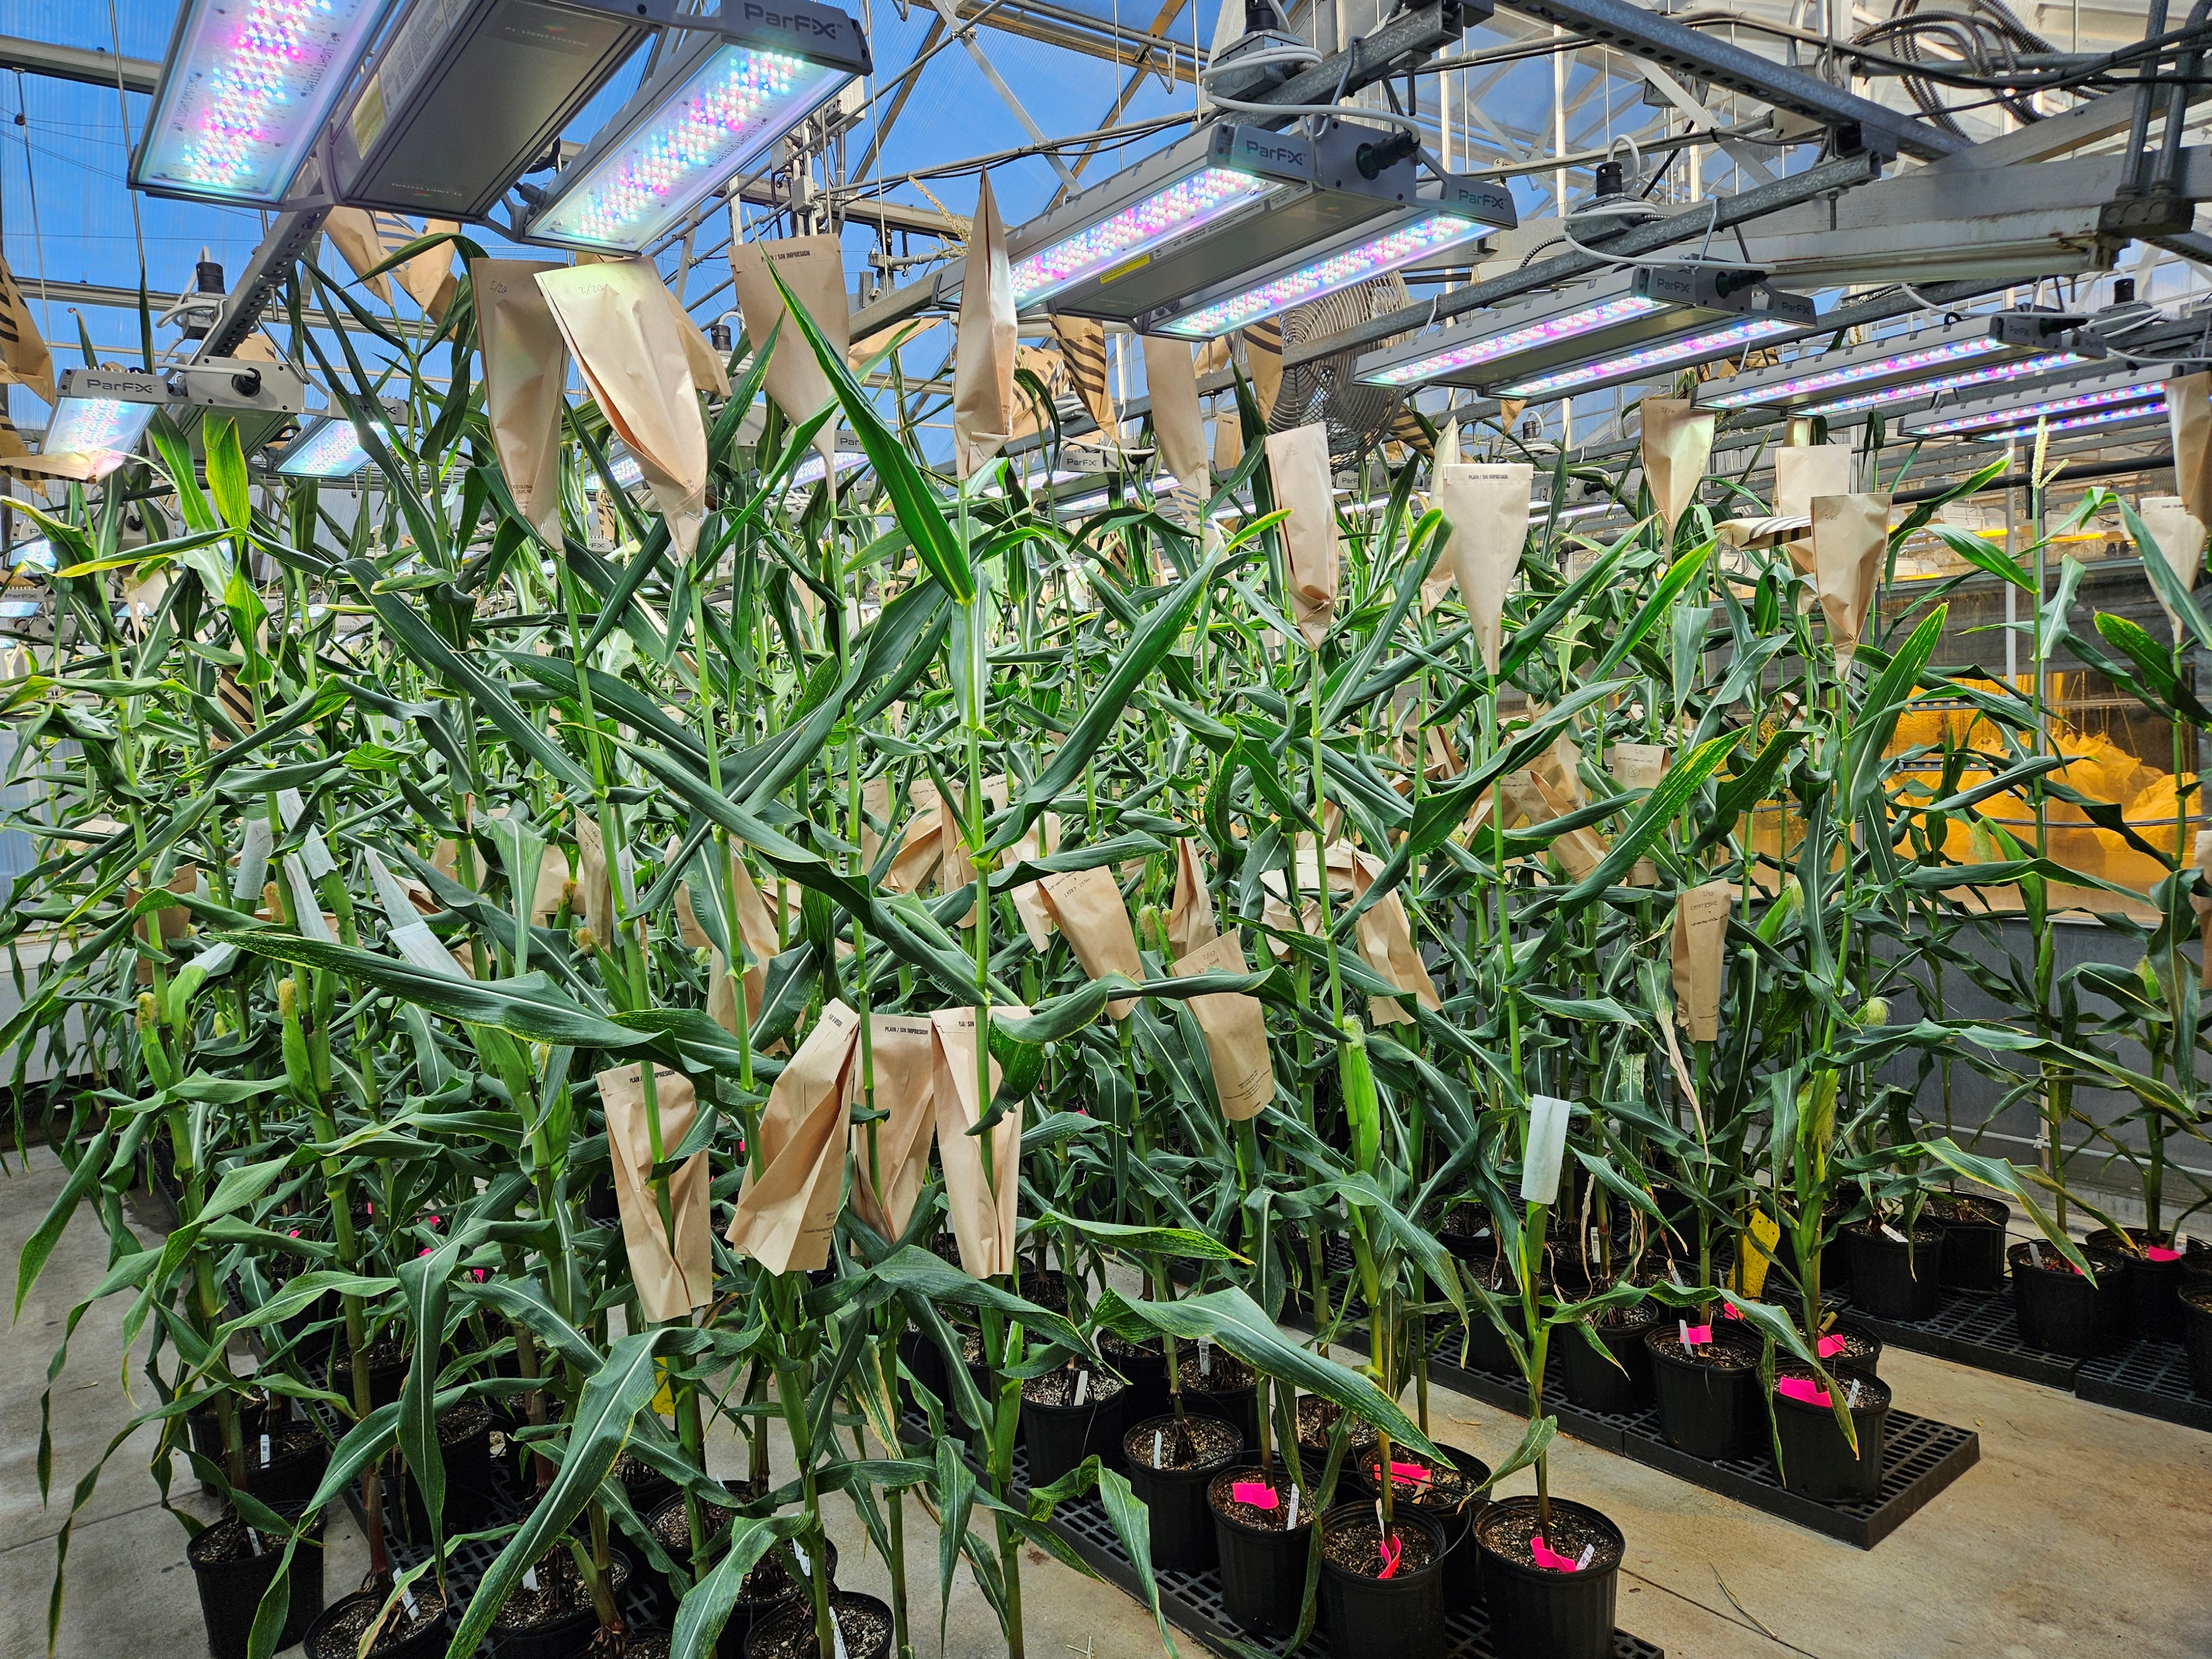 ZeaKal&#39;s PhotoSeed hybrid corn, grown in collaboration with the Wisconsin Crop Innovation Center in a glasshouse setting.